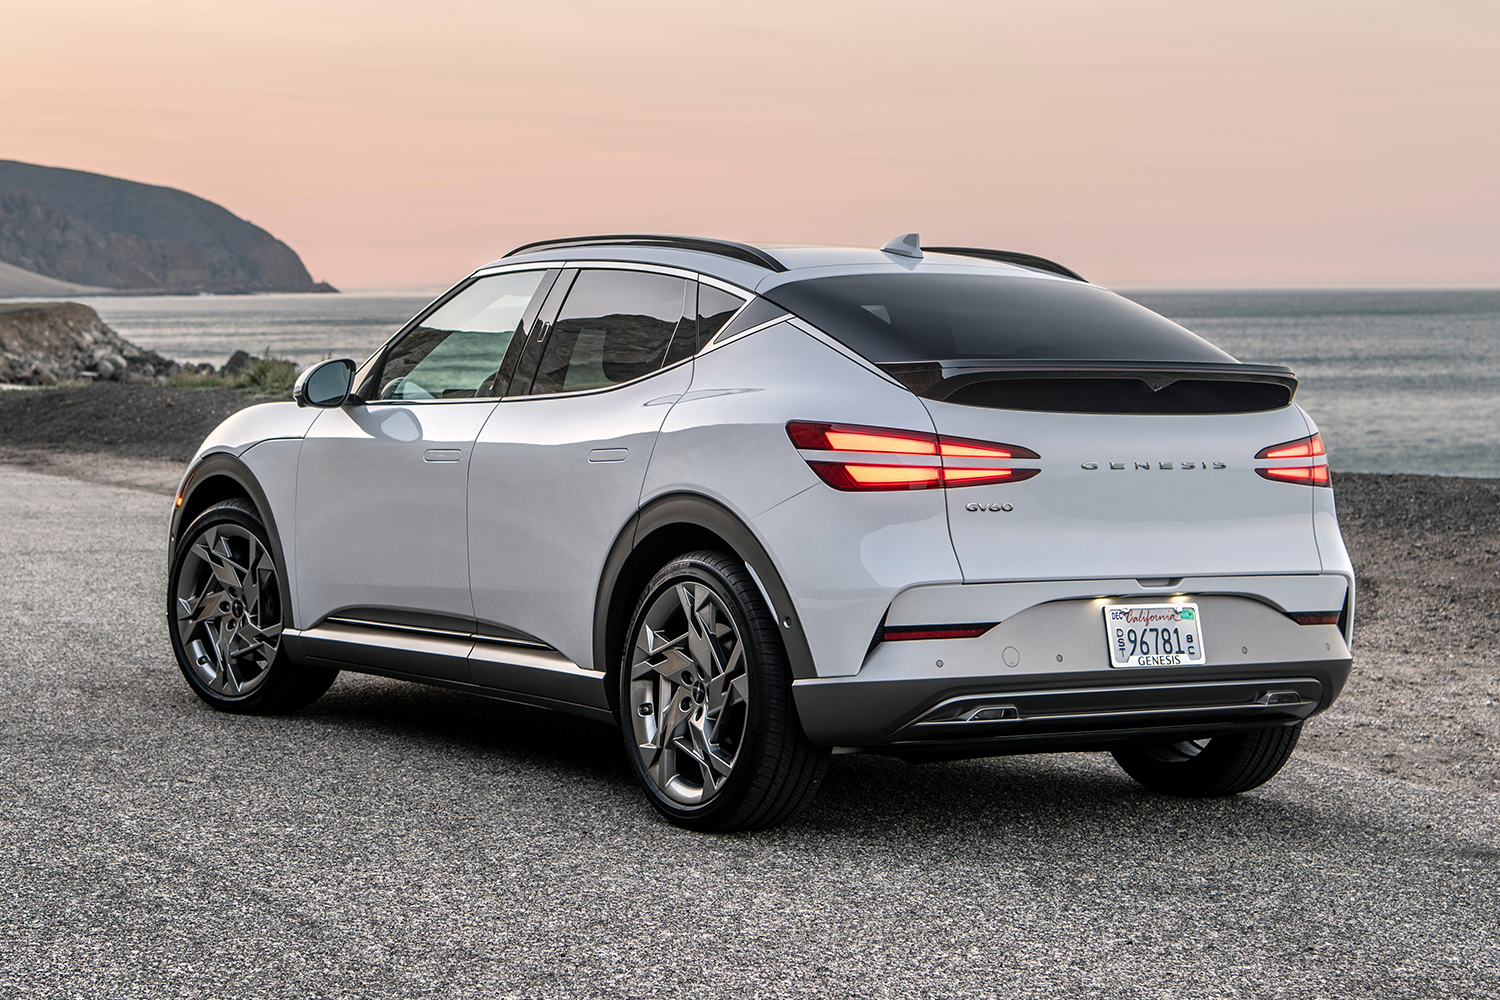 The Genesis GV60 rear end. We recently reviewed the electric SUV.